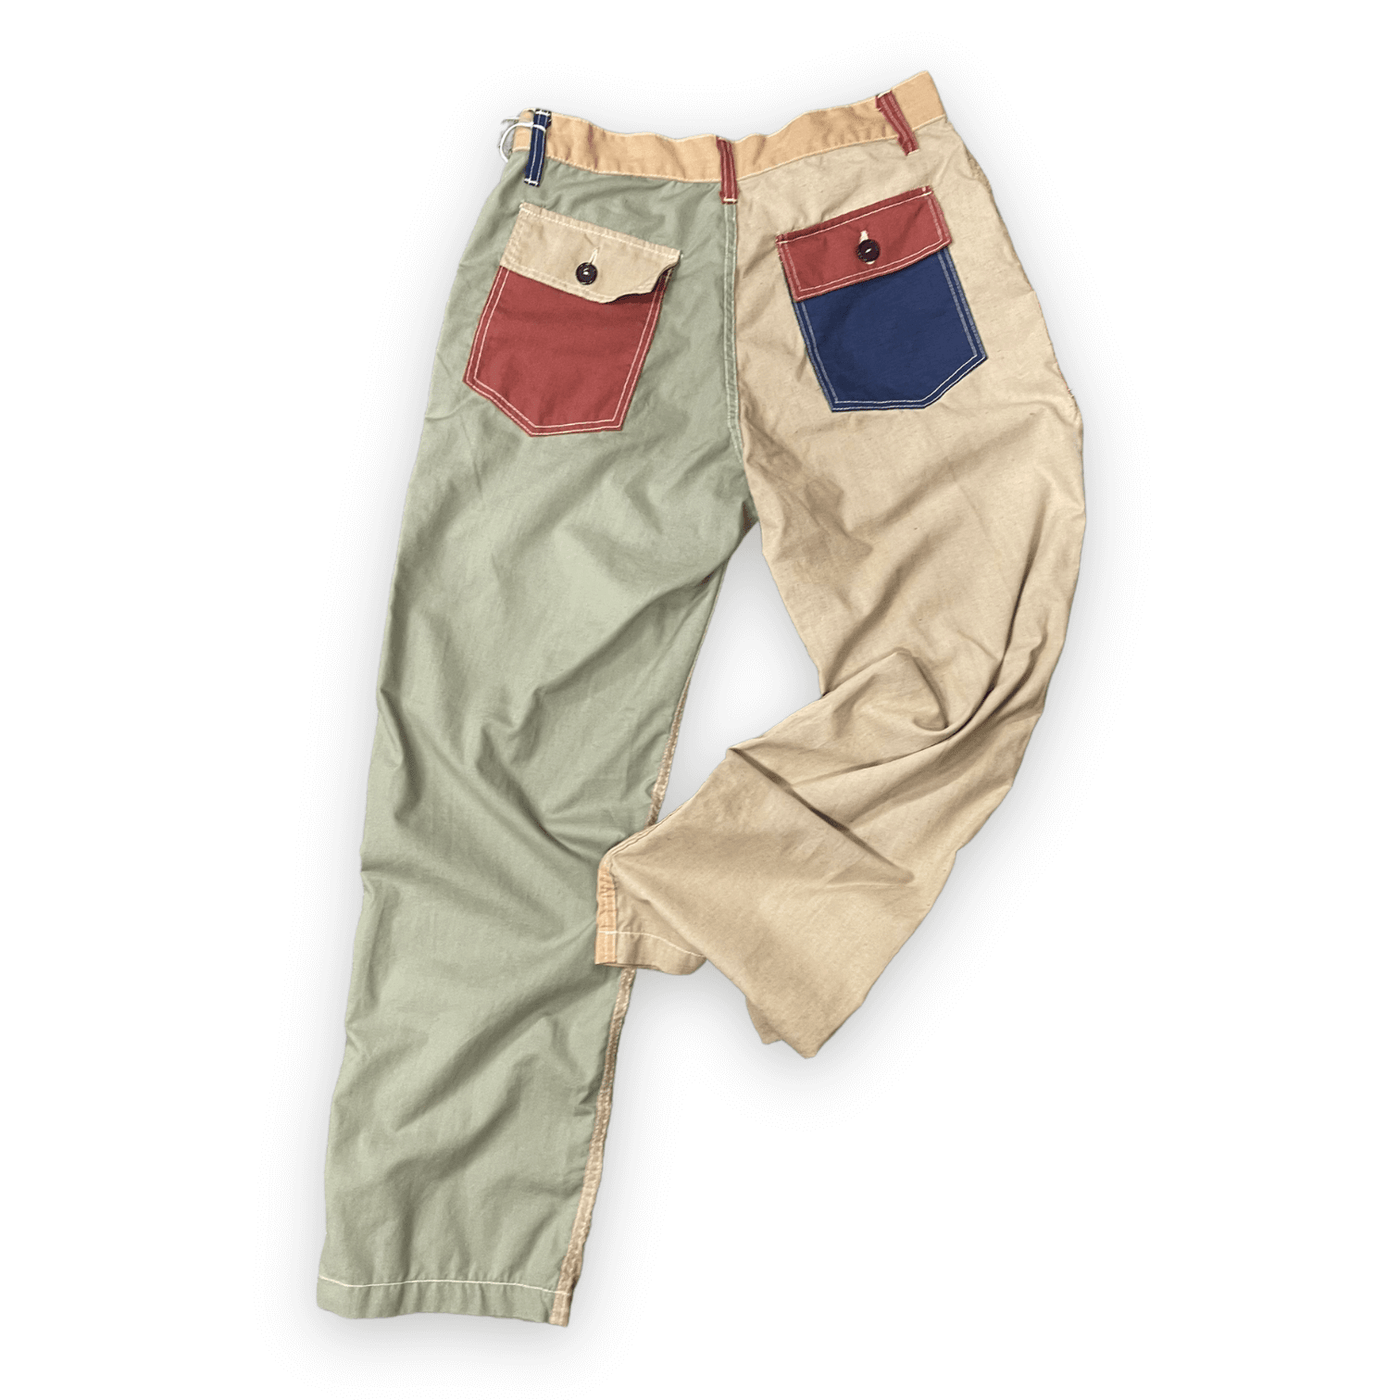 Colorblocked trouser with patch pockets